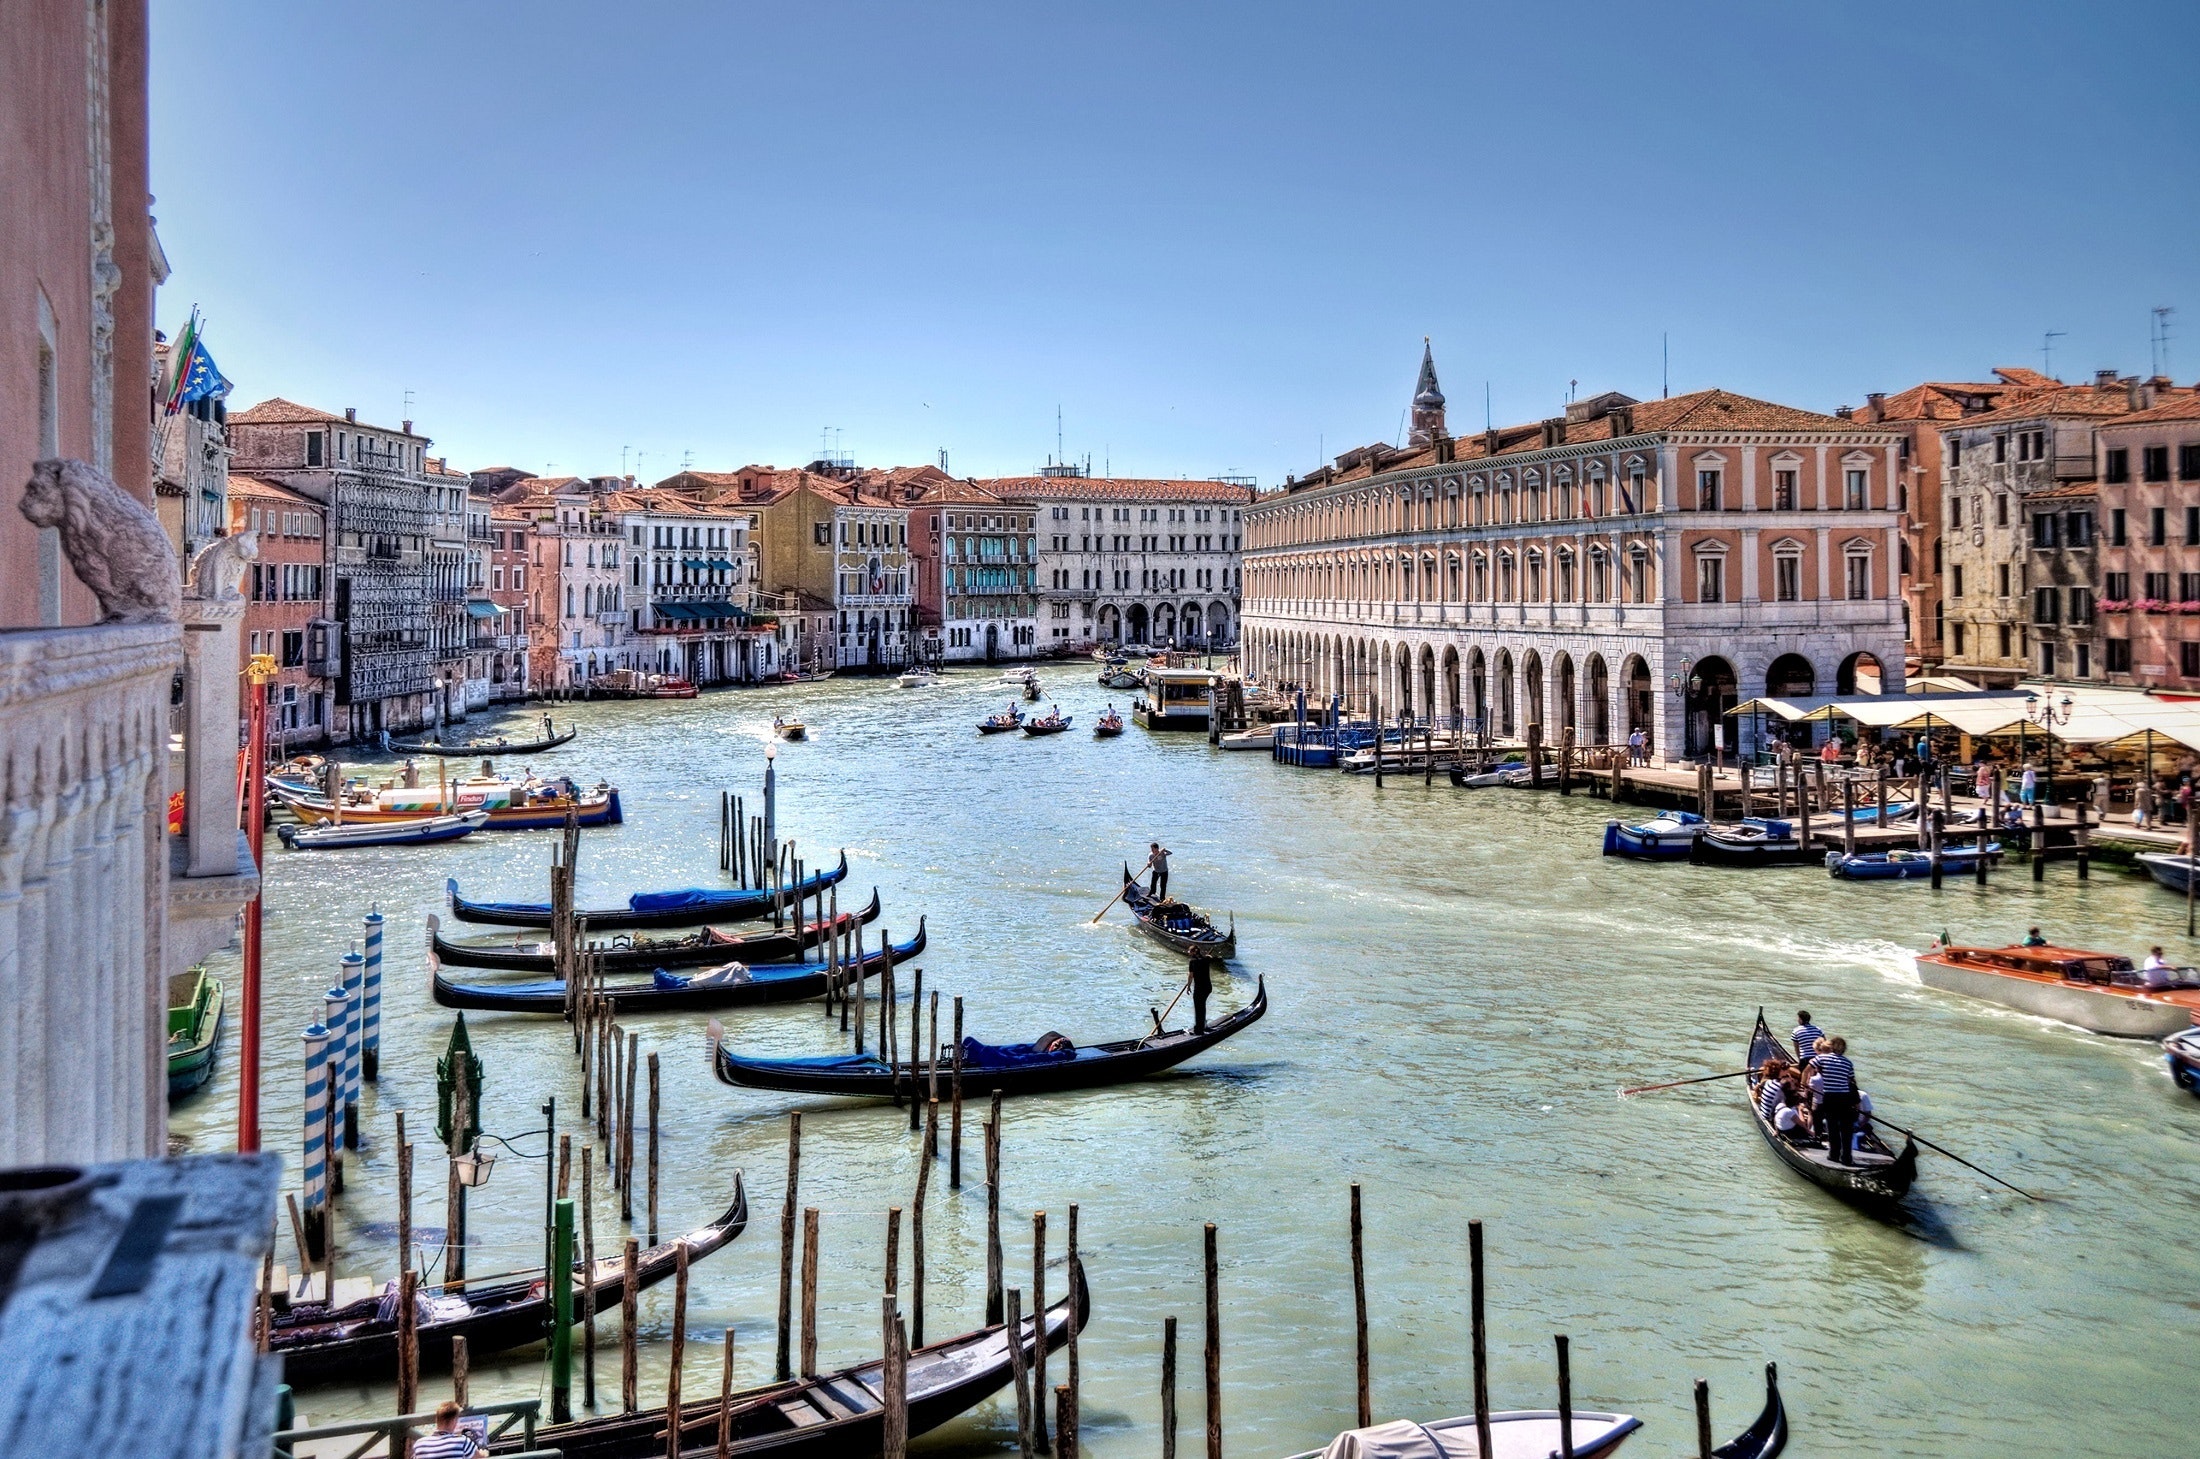 A scene from Italy - with canals in Venice and lovely buildings